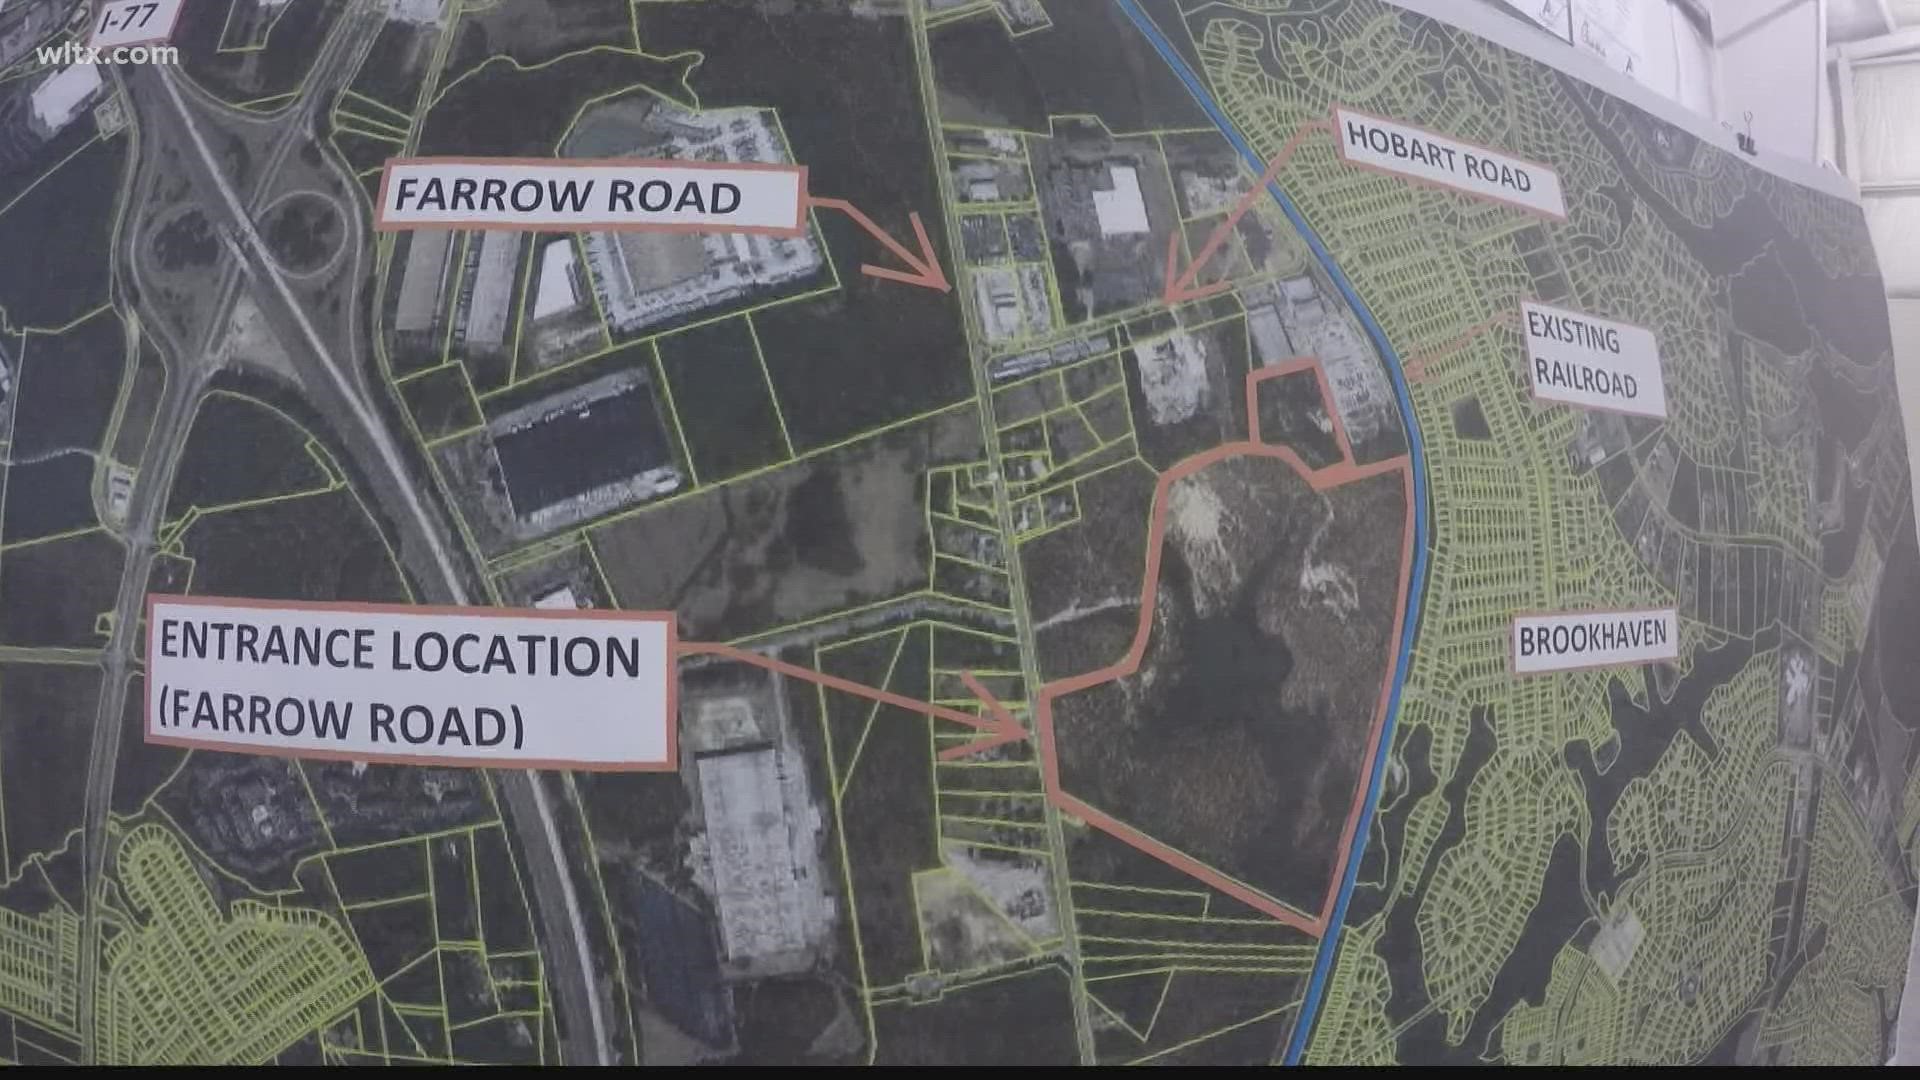 Richland County Council met with developers and members of the public on October 18 to discuss what could lead to big changes on Farrow Road near Blythewood.